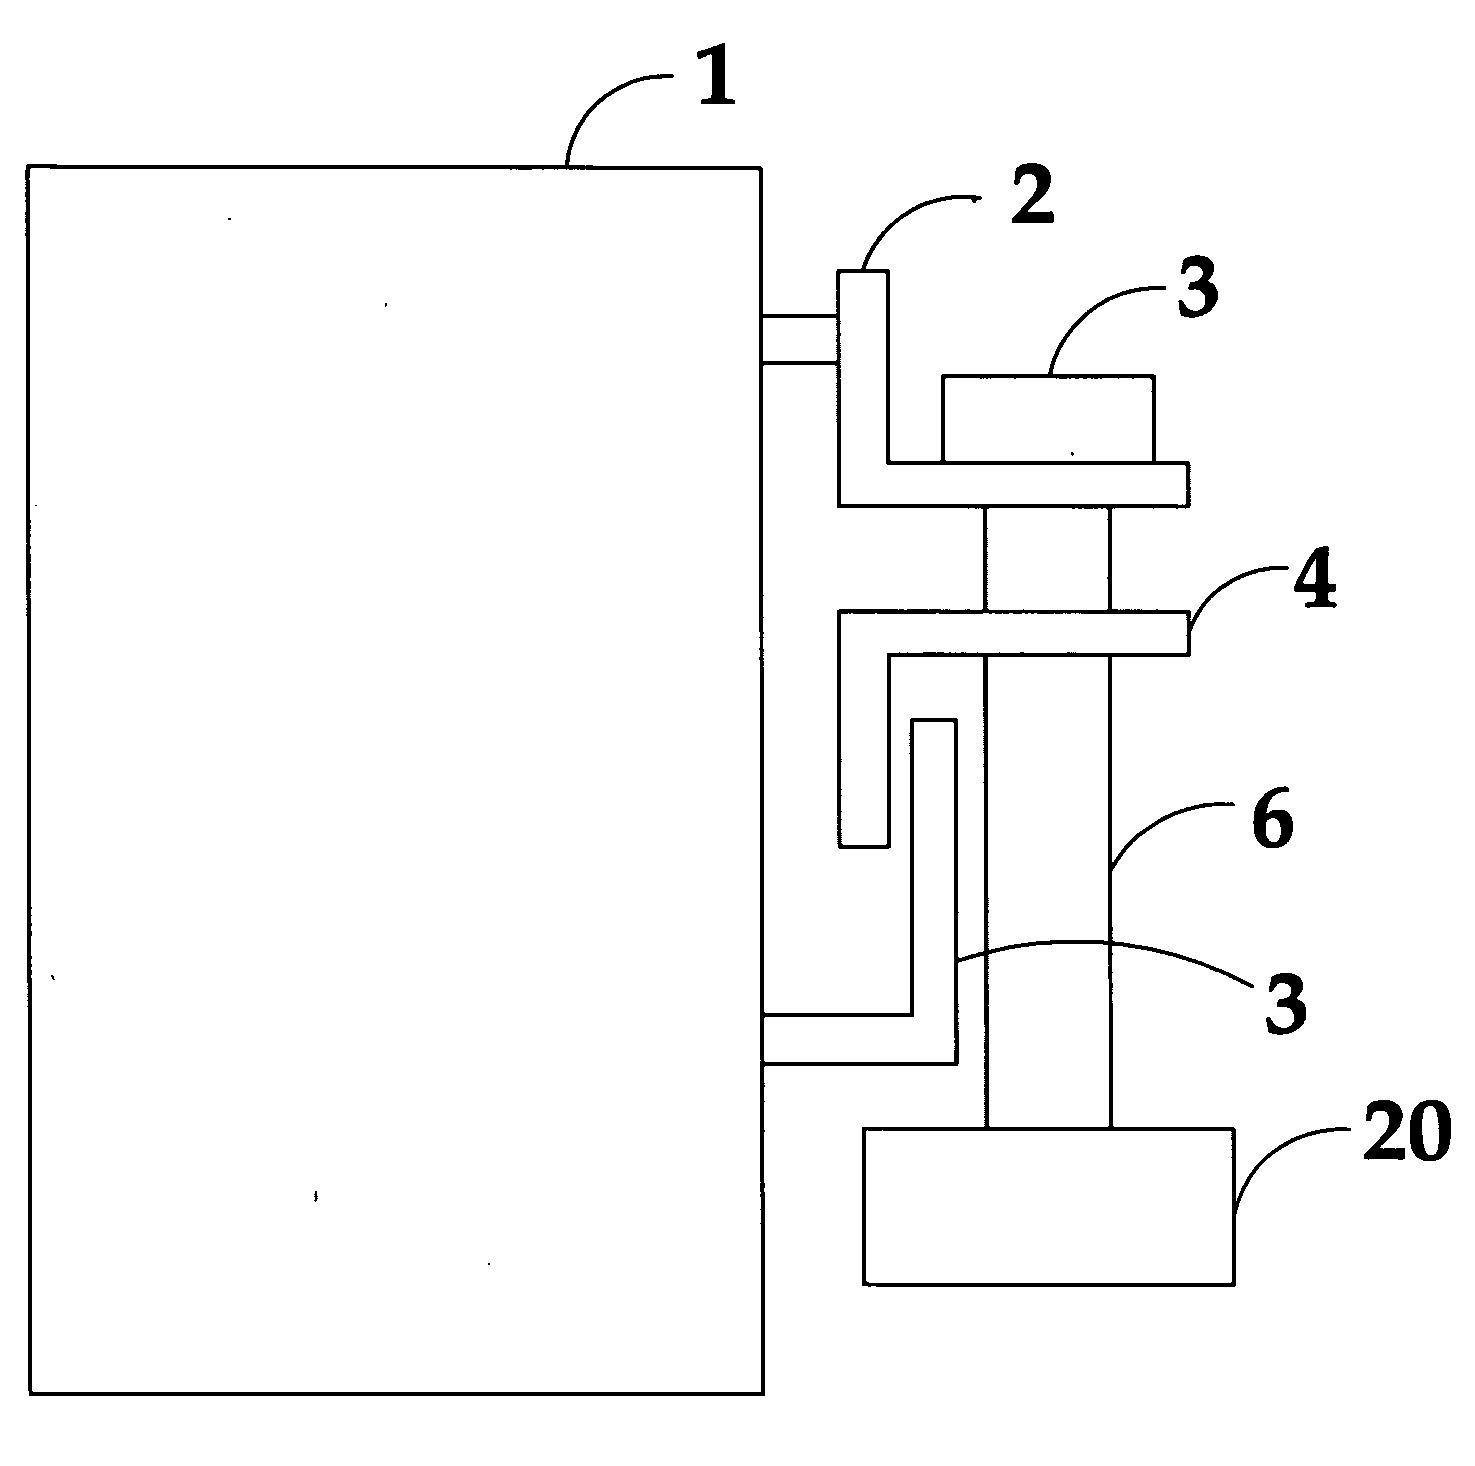 Container arrangement tag having positioning and electronic sealing function